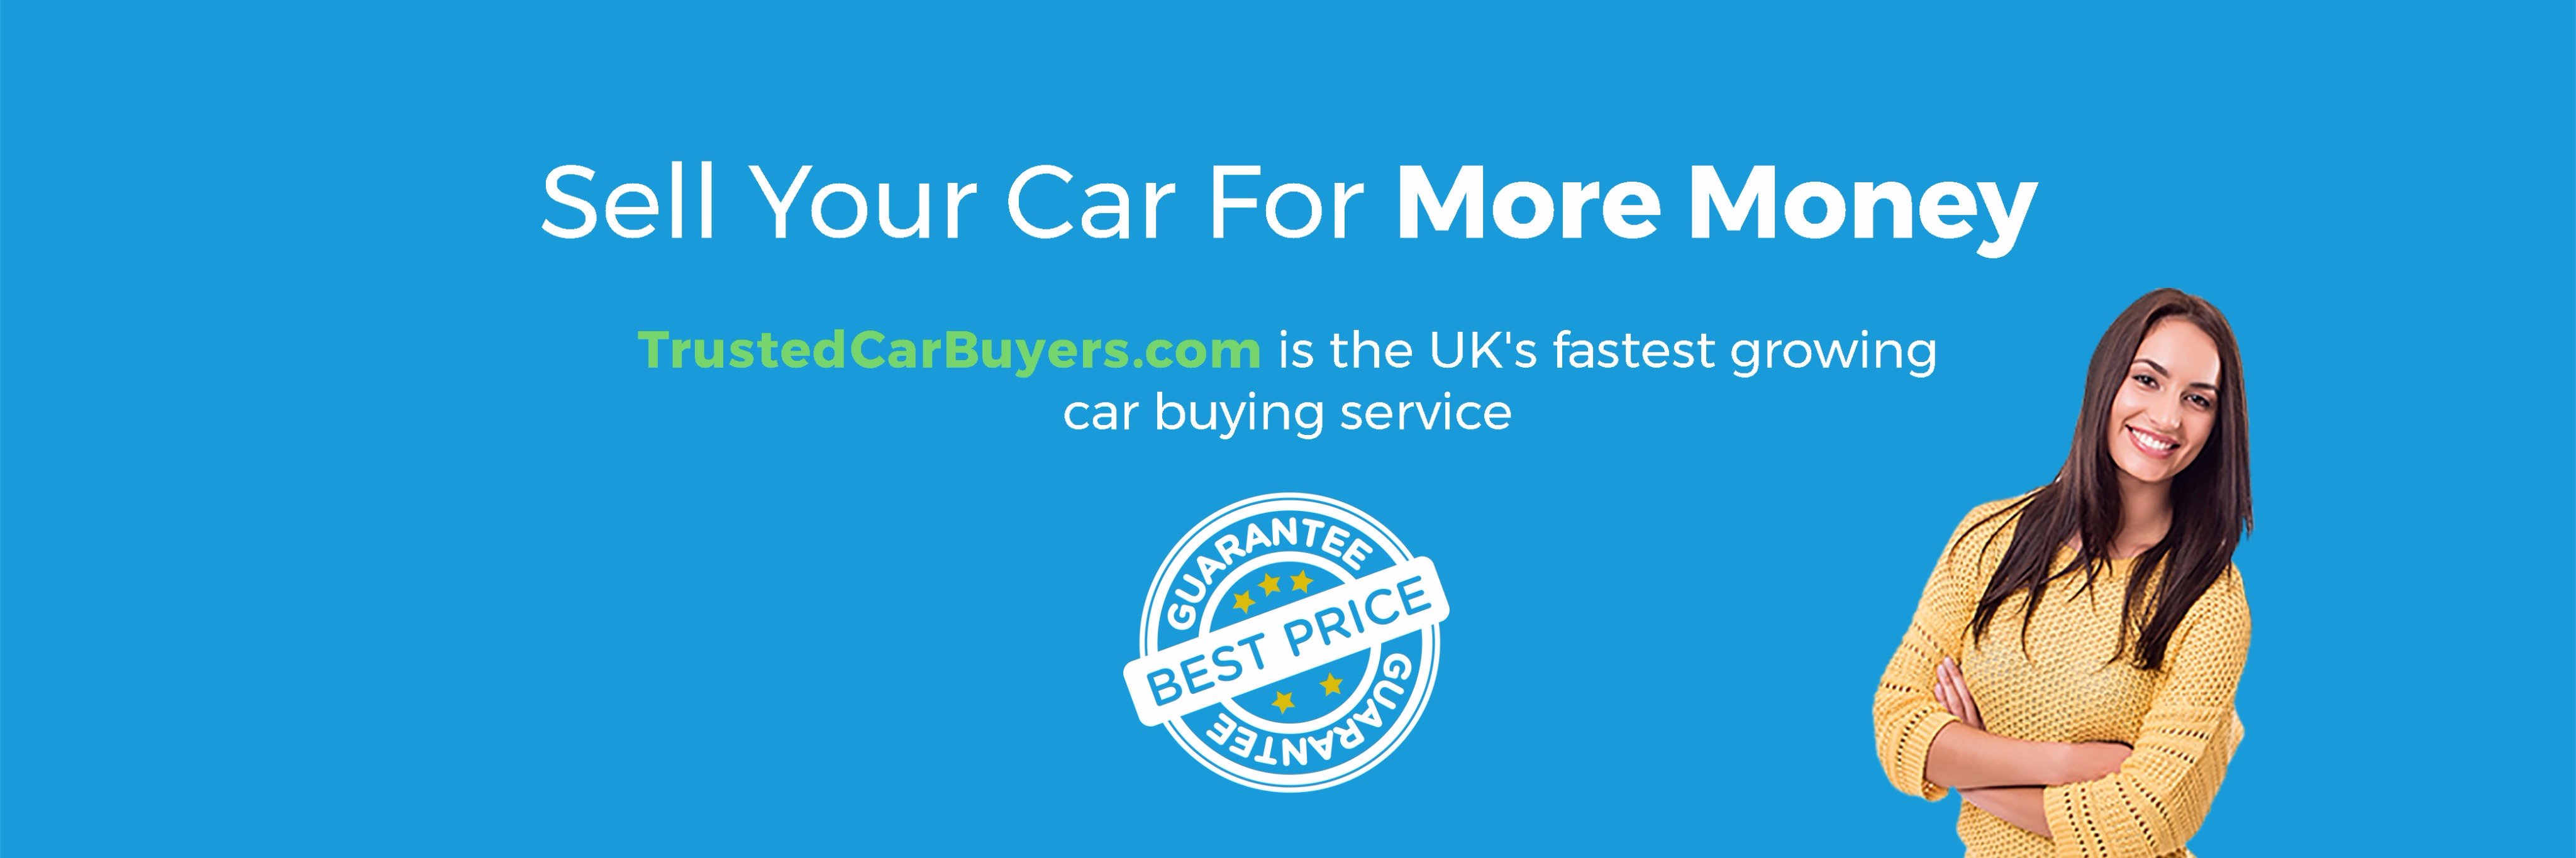 Trusted Car Buyers